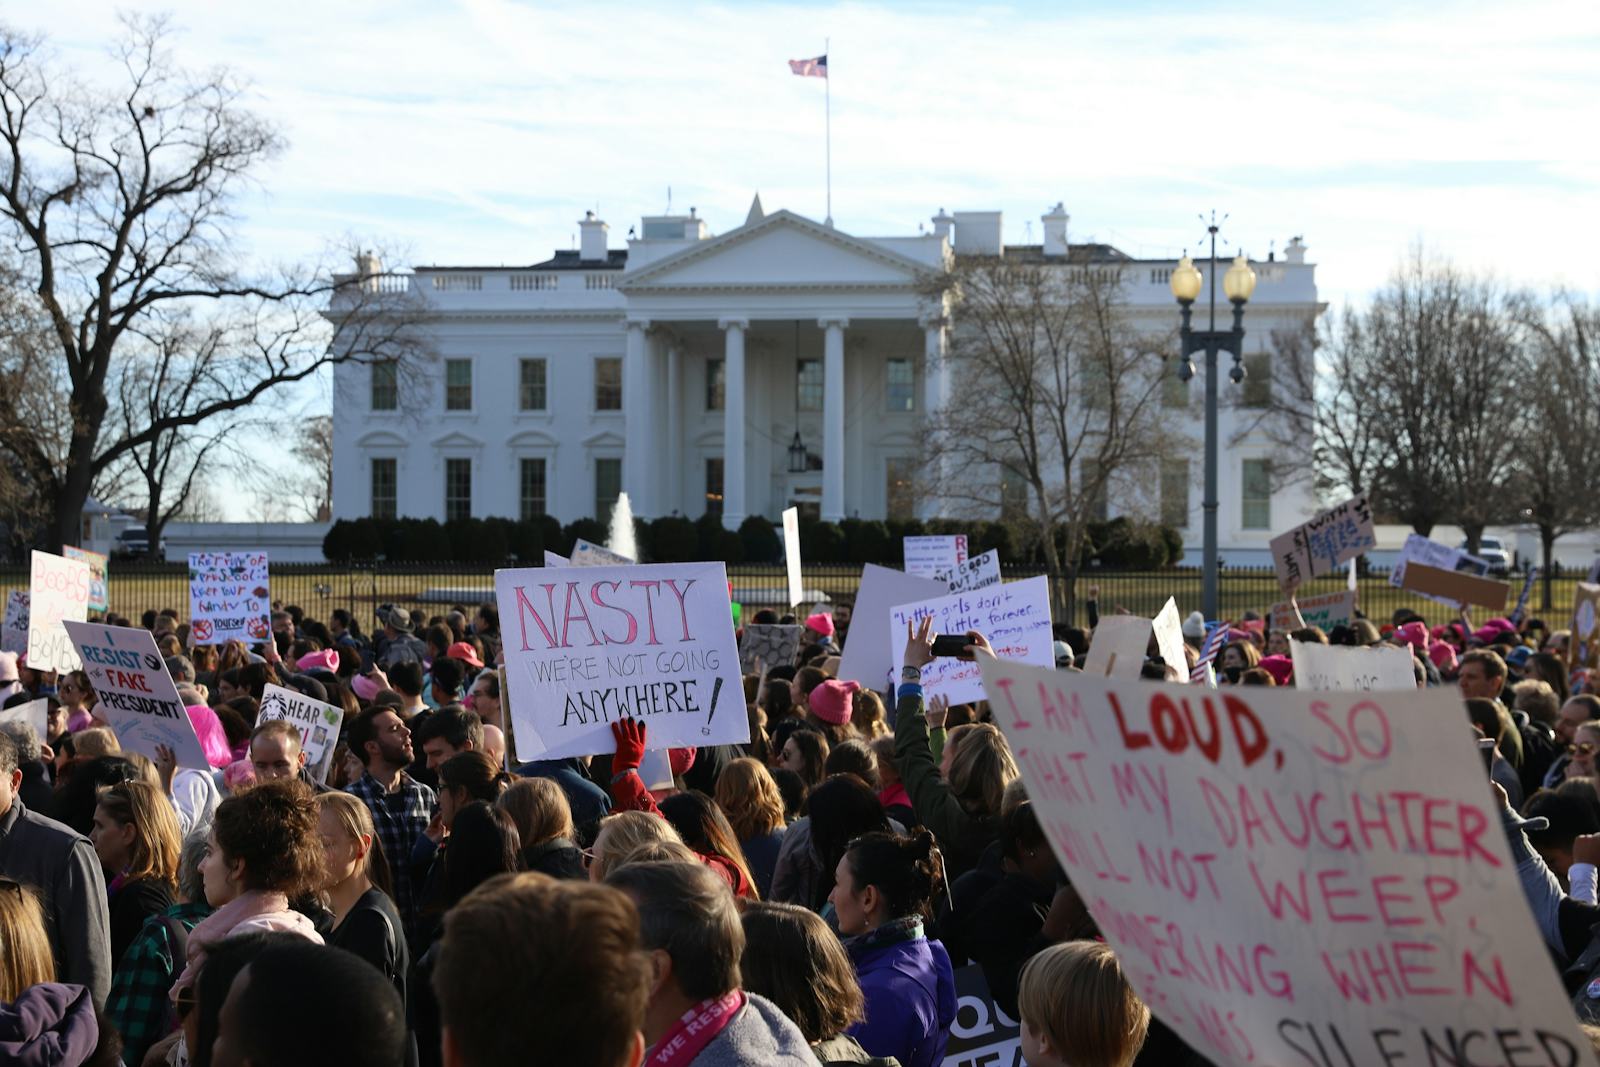 Protests Outside The White House Could Soon Be Limited & Experts Are